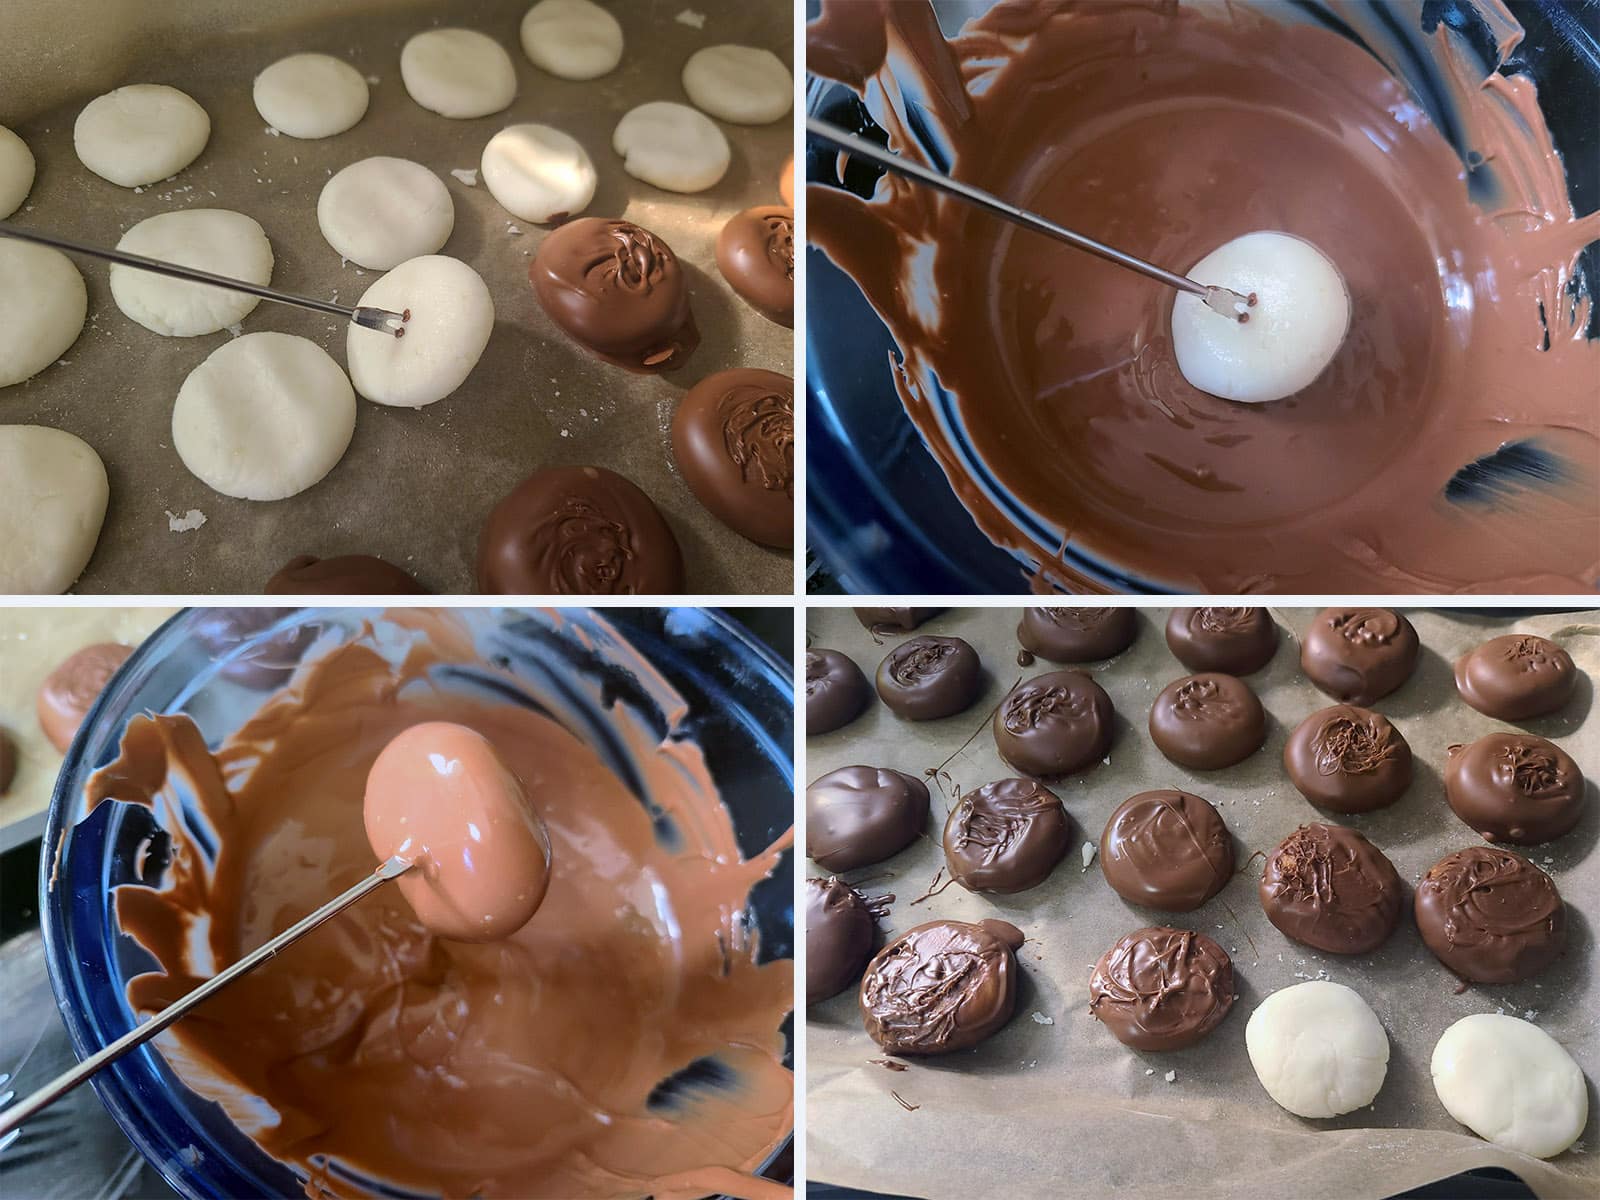 A 4 part image showing a peppermint disk being speared on a fondue fork and dipped in chocolate.